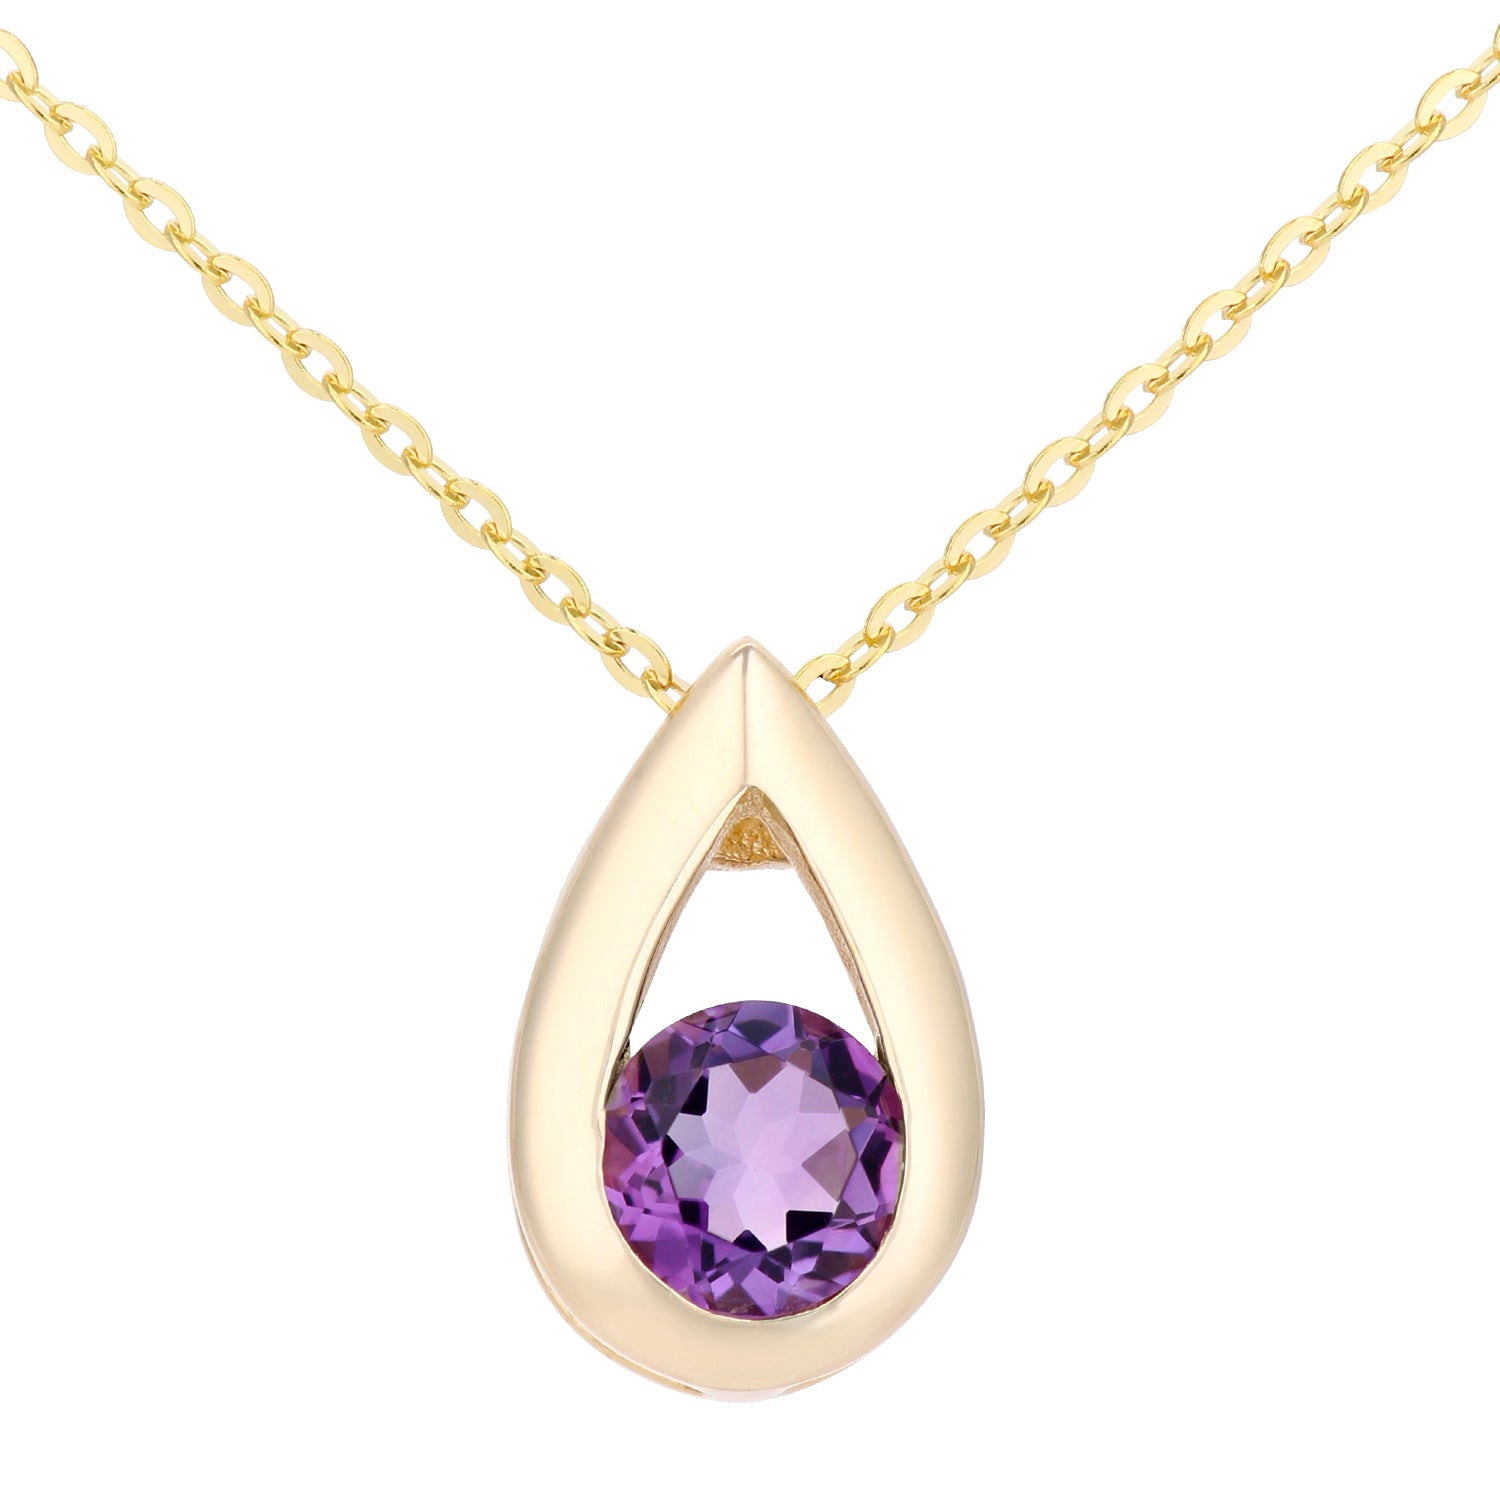 9ct Gold  Round 22pts Amethyst Teardrop Pendant Necklace 18 inch - PP0AXL1715YAM